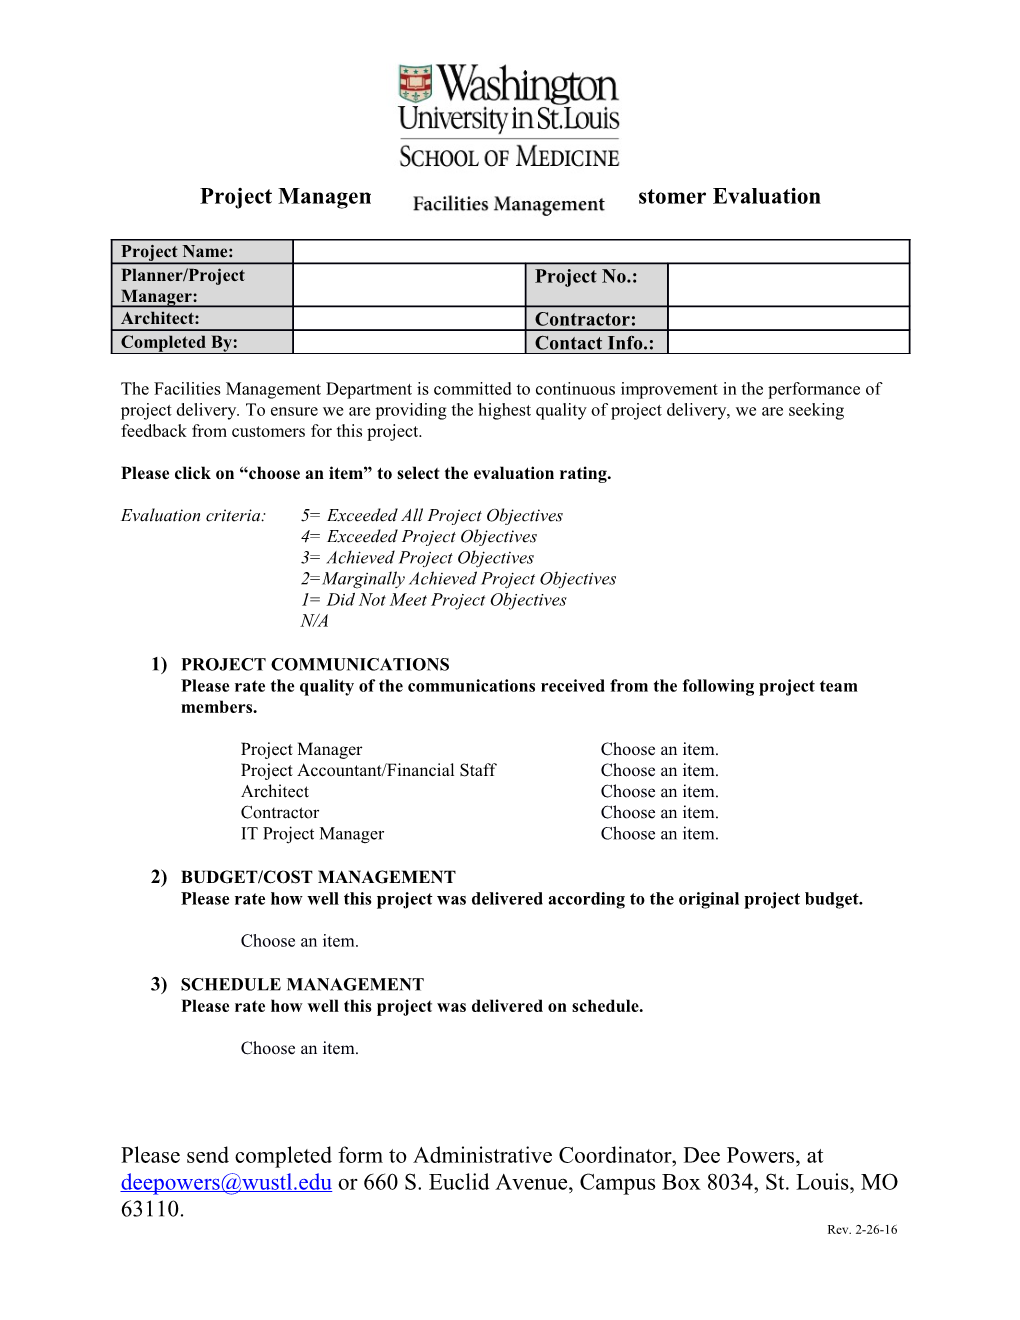 Project Management & Project Delivery Customer Evaluation